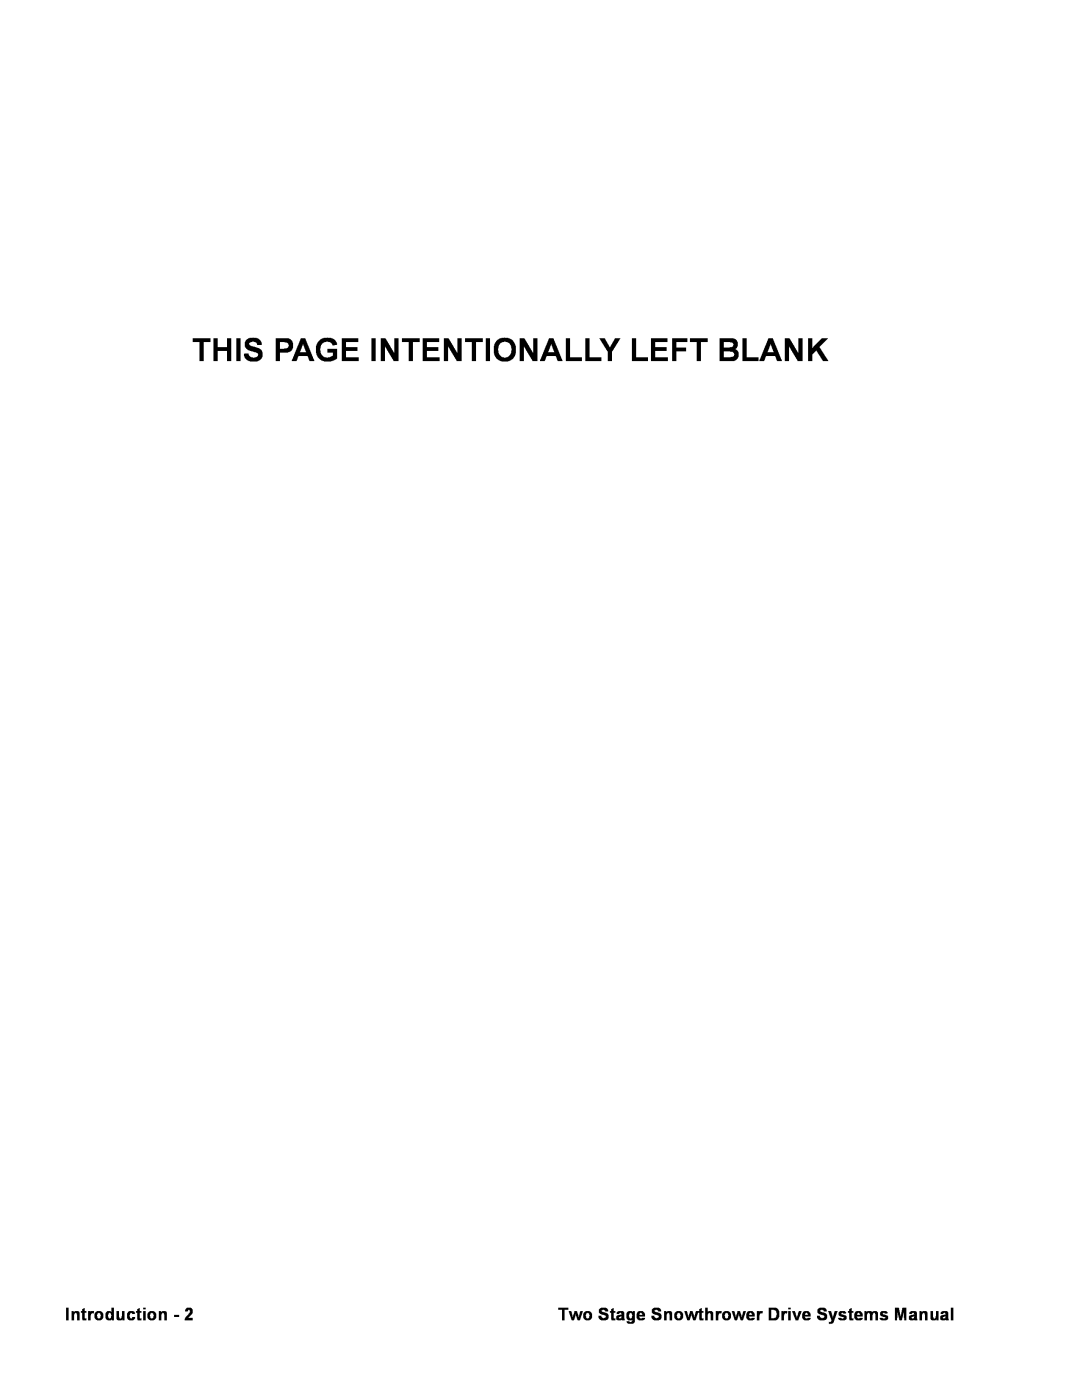 Toro 38080, 38065 manual This Page Intentionally Left Blank, Introduction, Two Stage Snowthrower Drive Systems Manual 